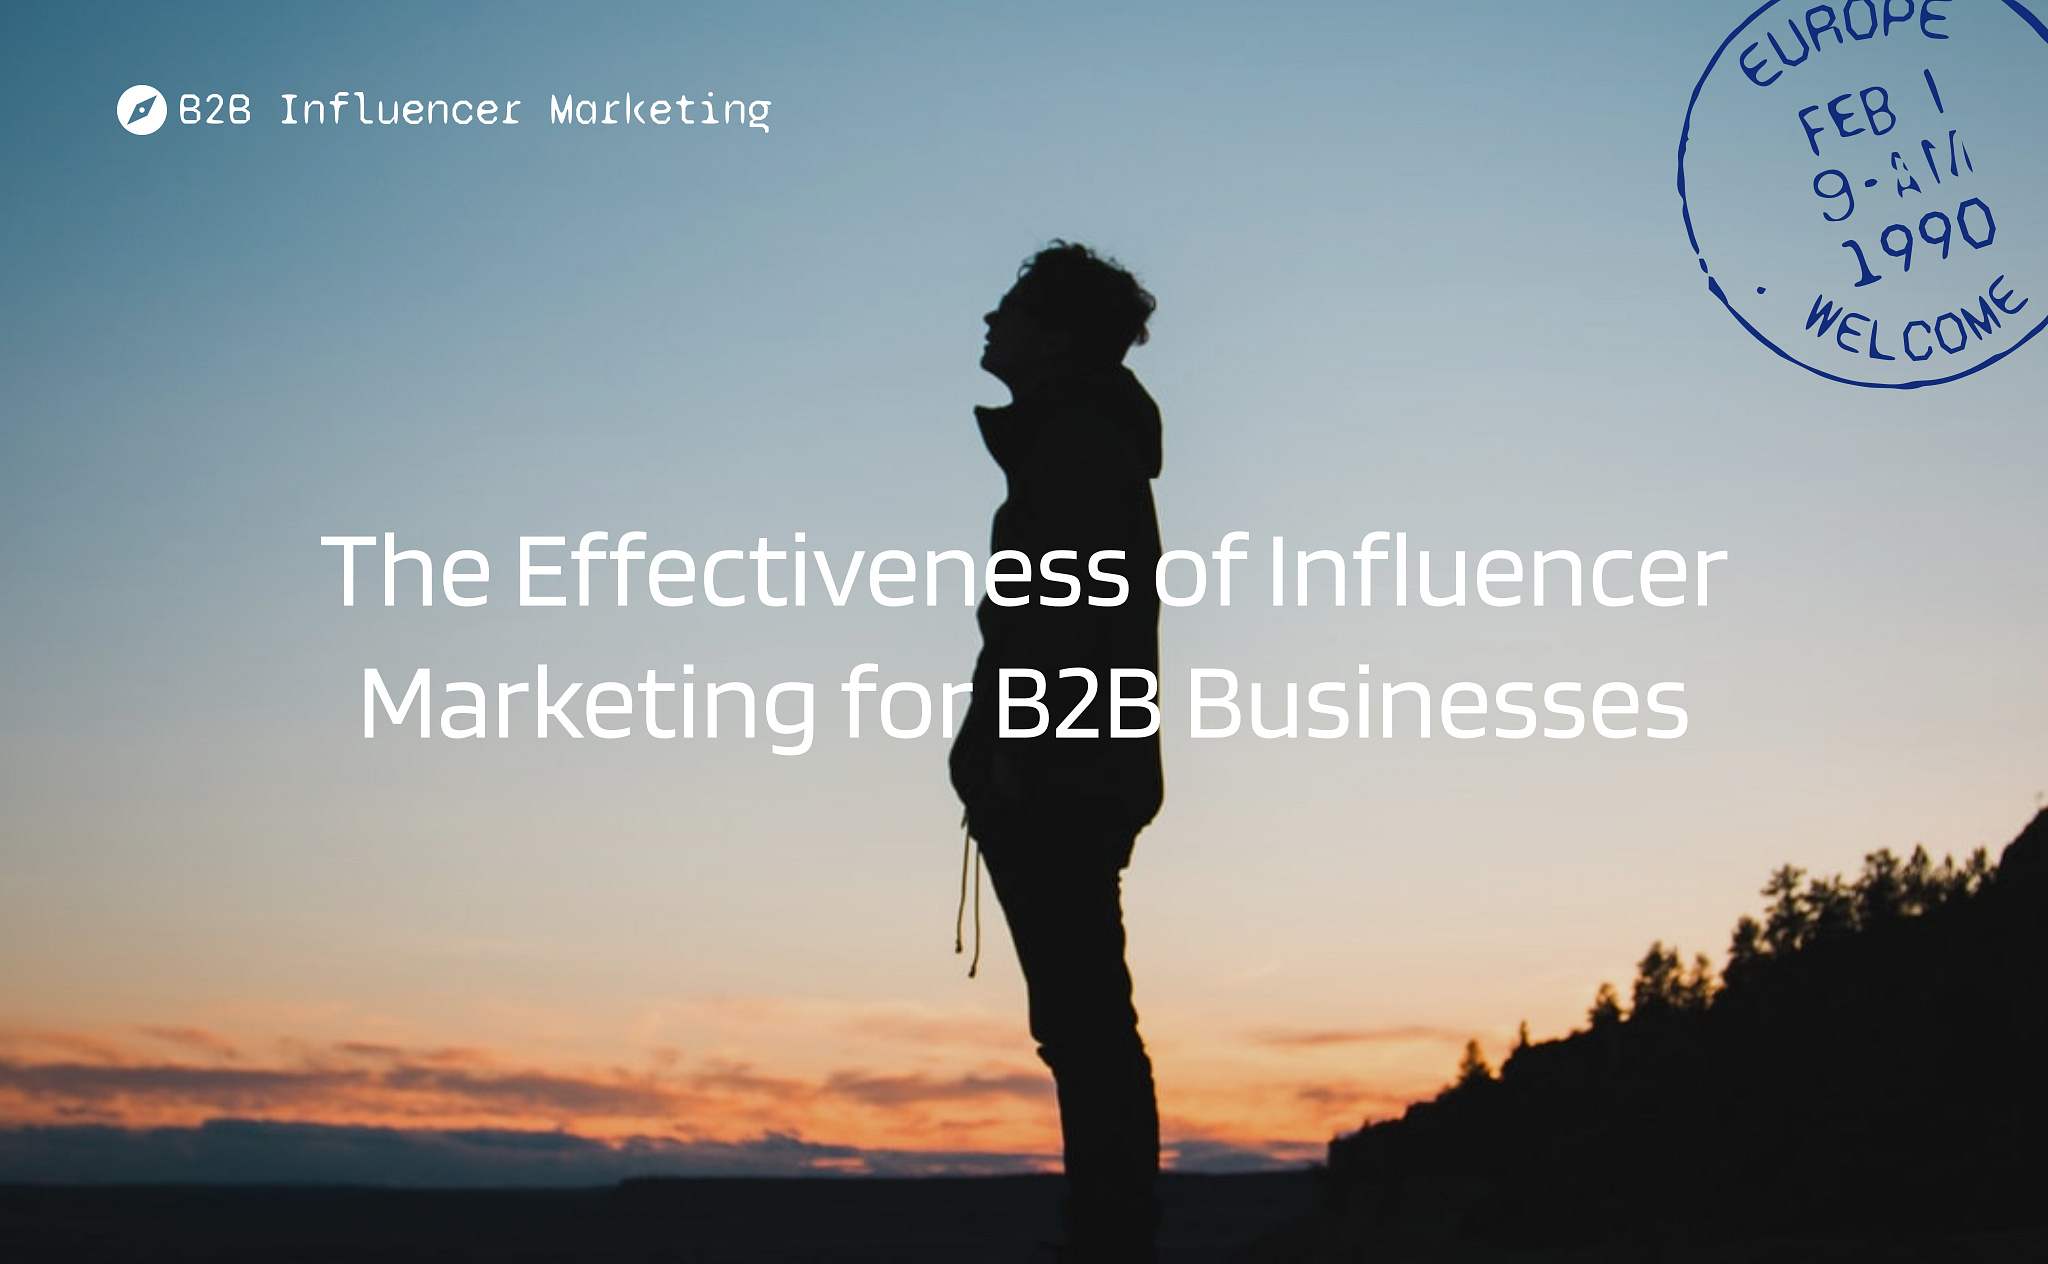 The Effectiveness of Influencer Marketing for B2B Businesses